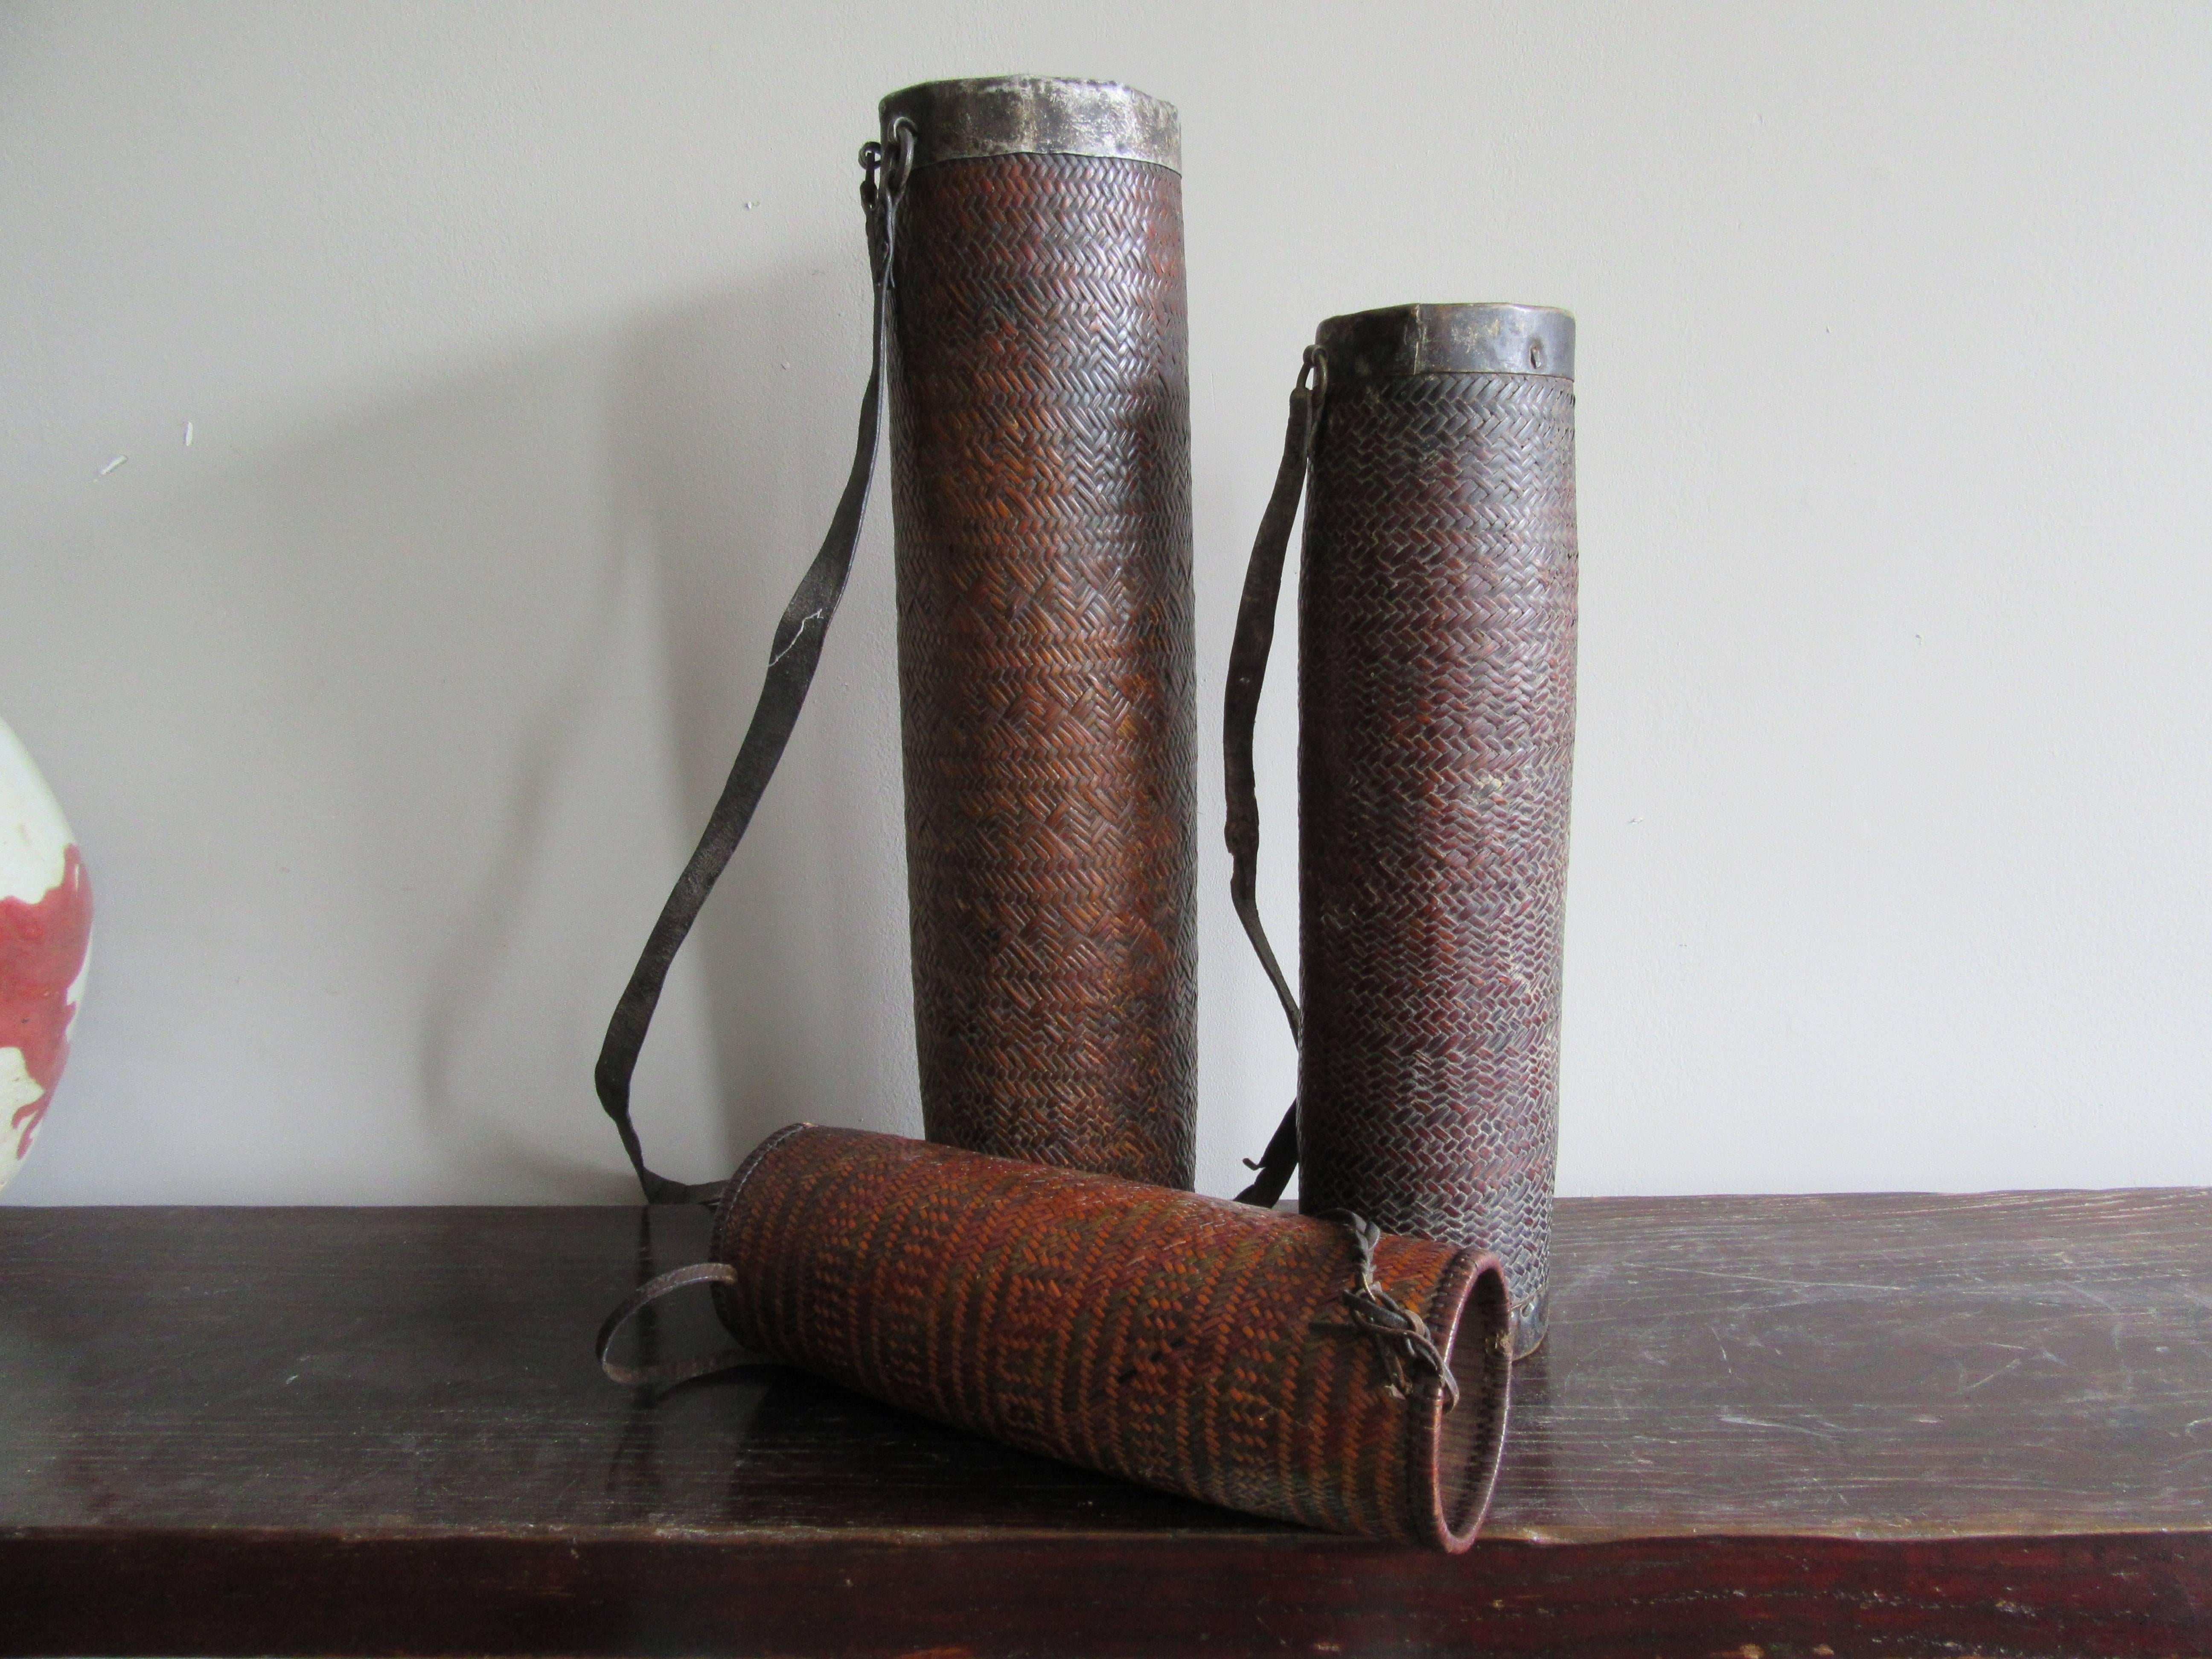 Chinese Bhutan Barley Beer Thermos, Set of Three, Early 20th Century For Sale